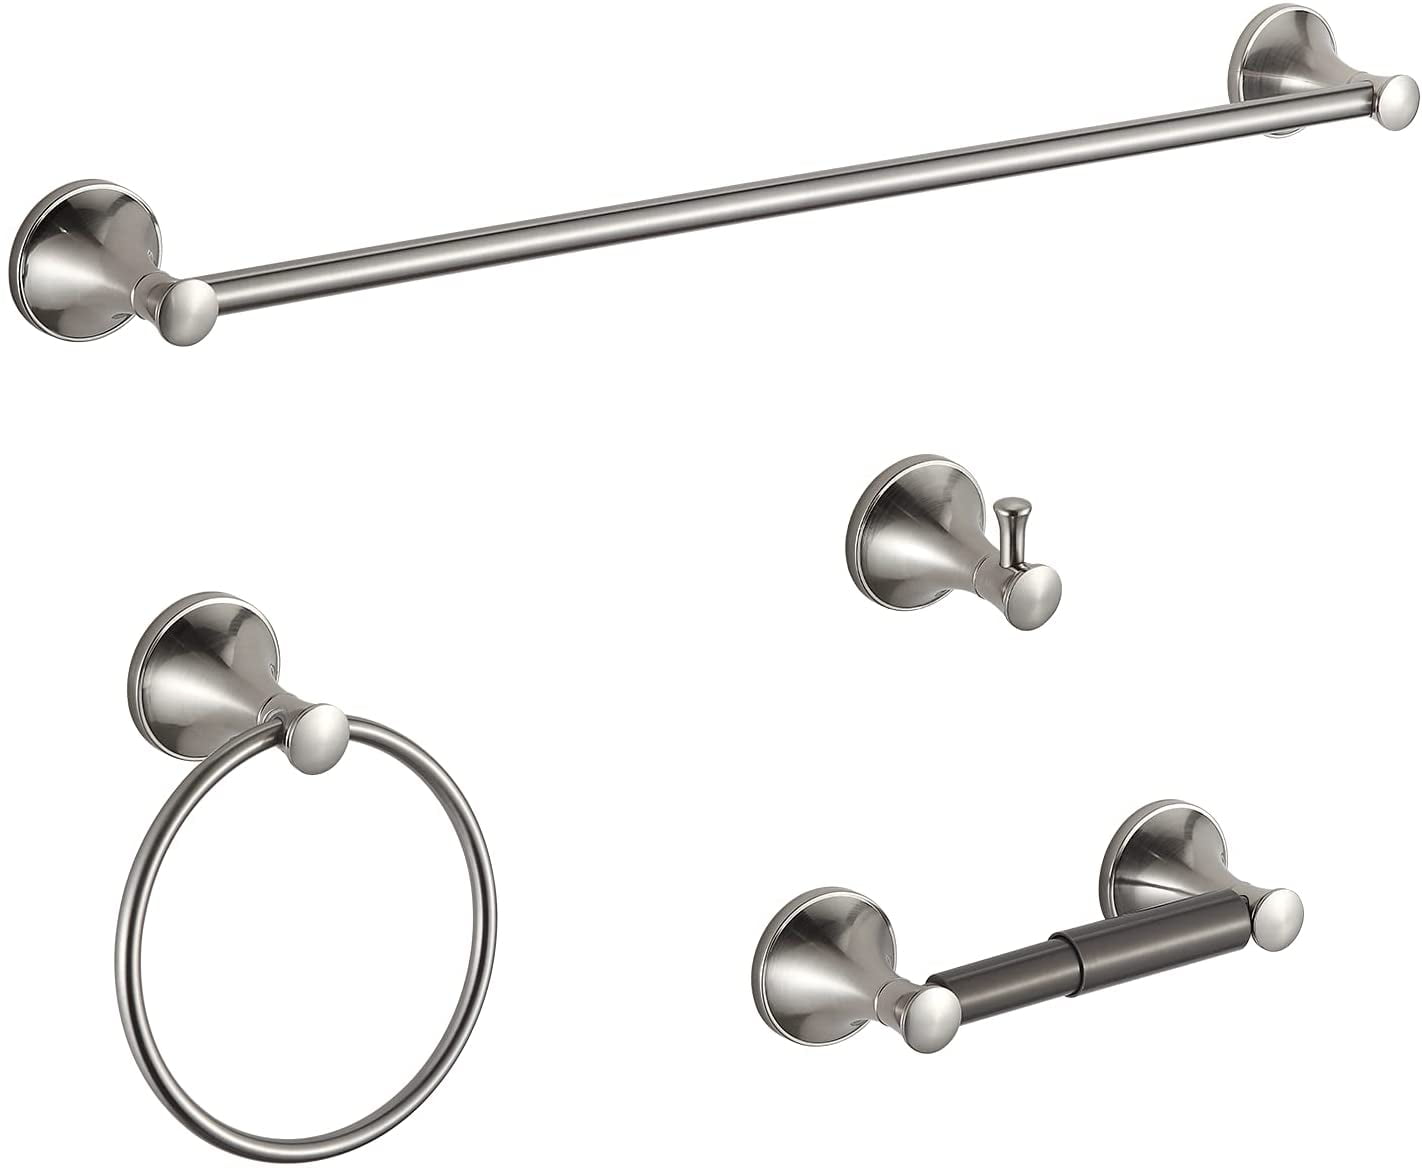 Four Piece Bathroom Accessories Set Stainless Steel Wall Mounted Brushed Nickel